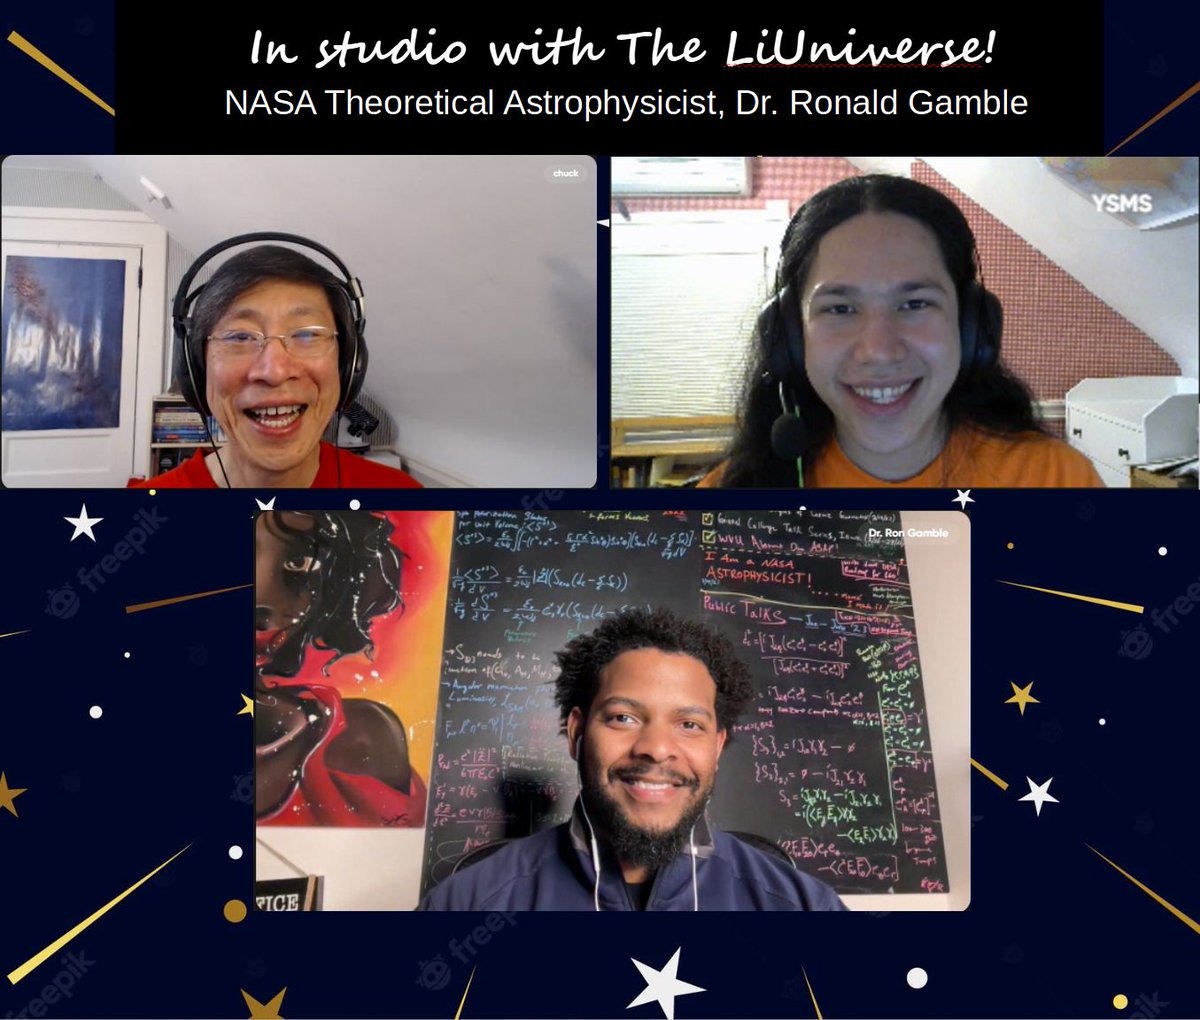 🎙️@chuckliu & @AllenGalileo are busy recording new #podcast episodes of @TheLiuniverse! 👀Keep an eye out for their fun and exciting conversation with @Dr_Gamble21, @NASAGoddard theoretical #astrophysicist!
#space #science #podcast @UMBaltimore @BlackInAstro